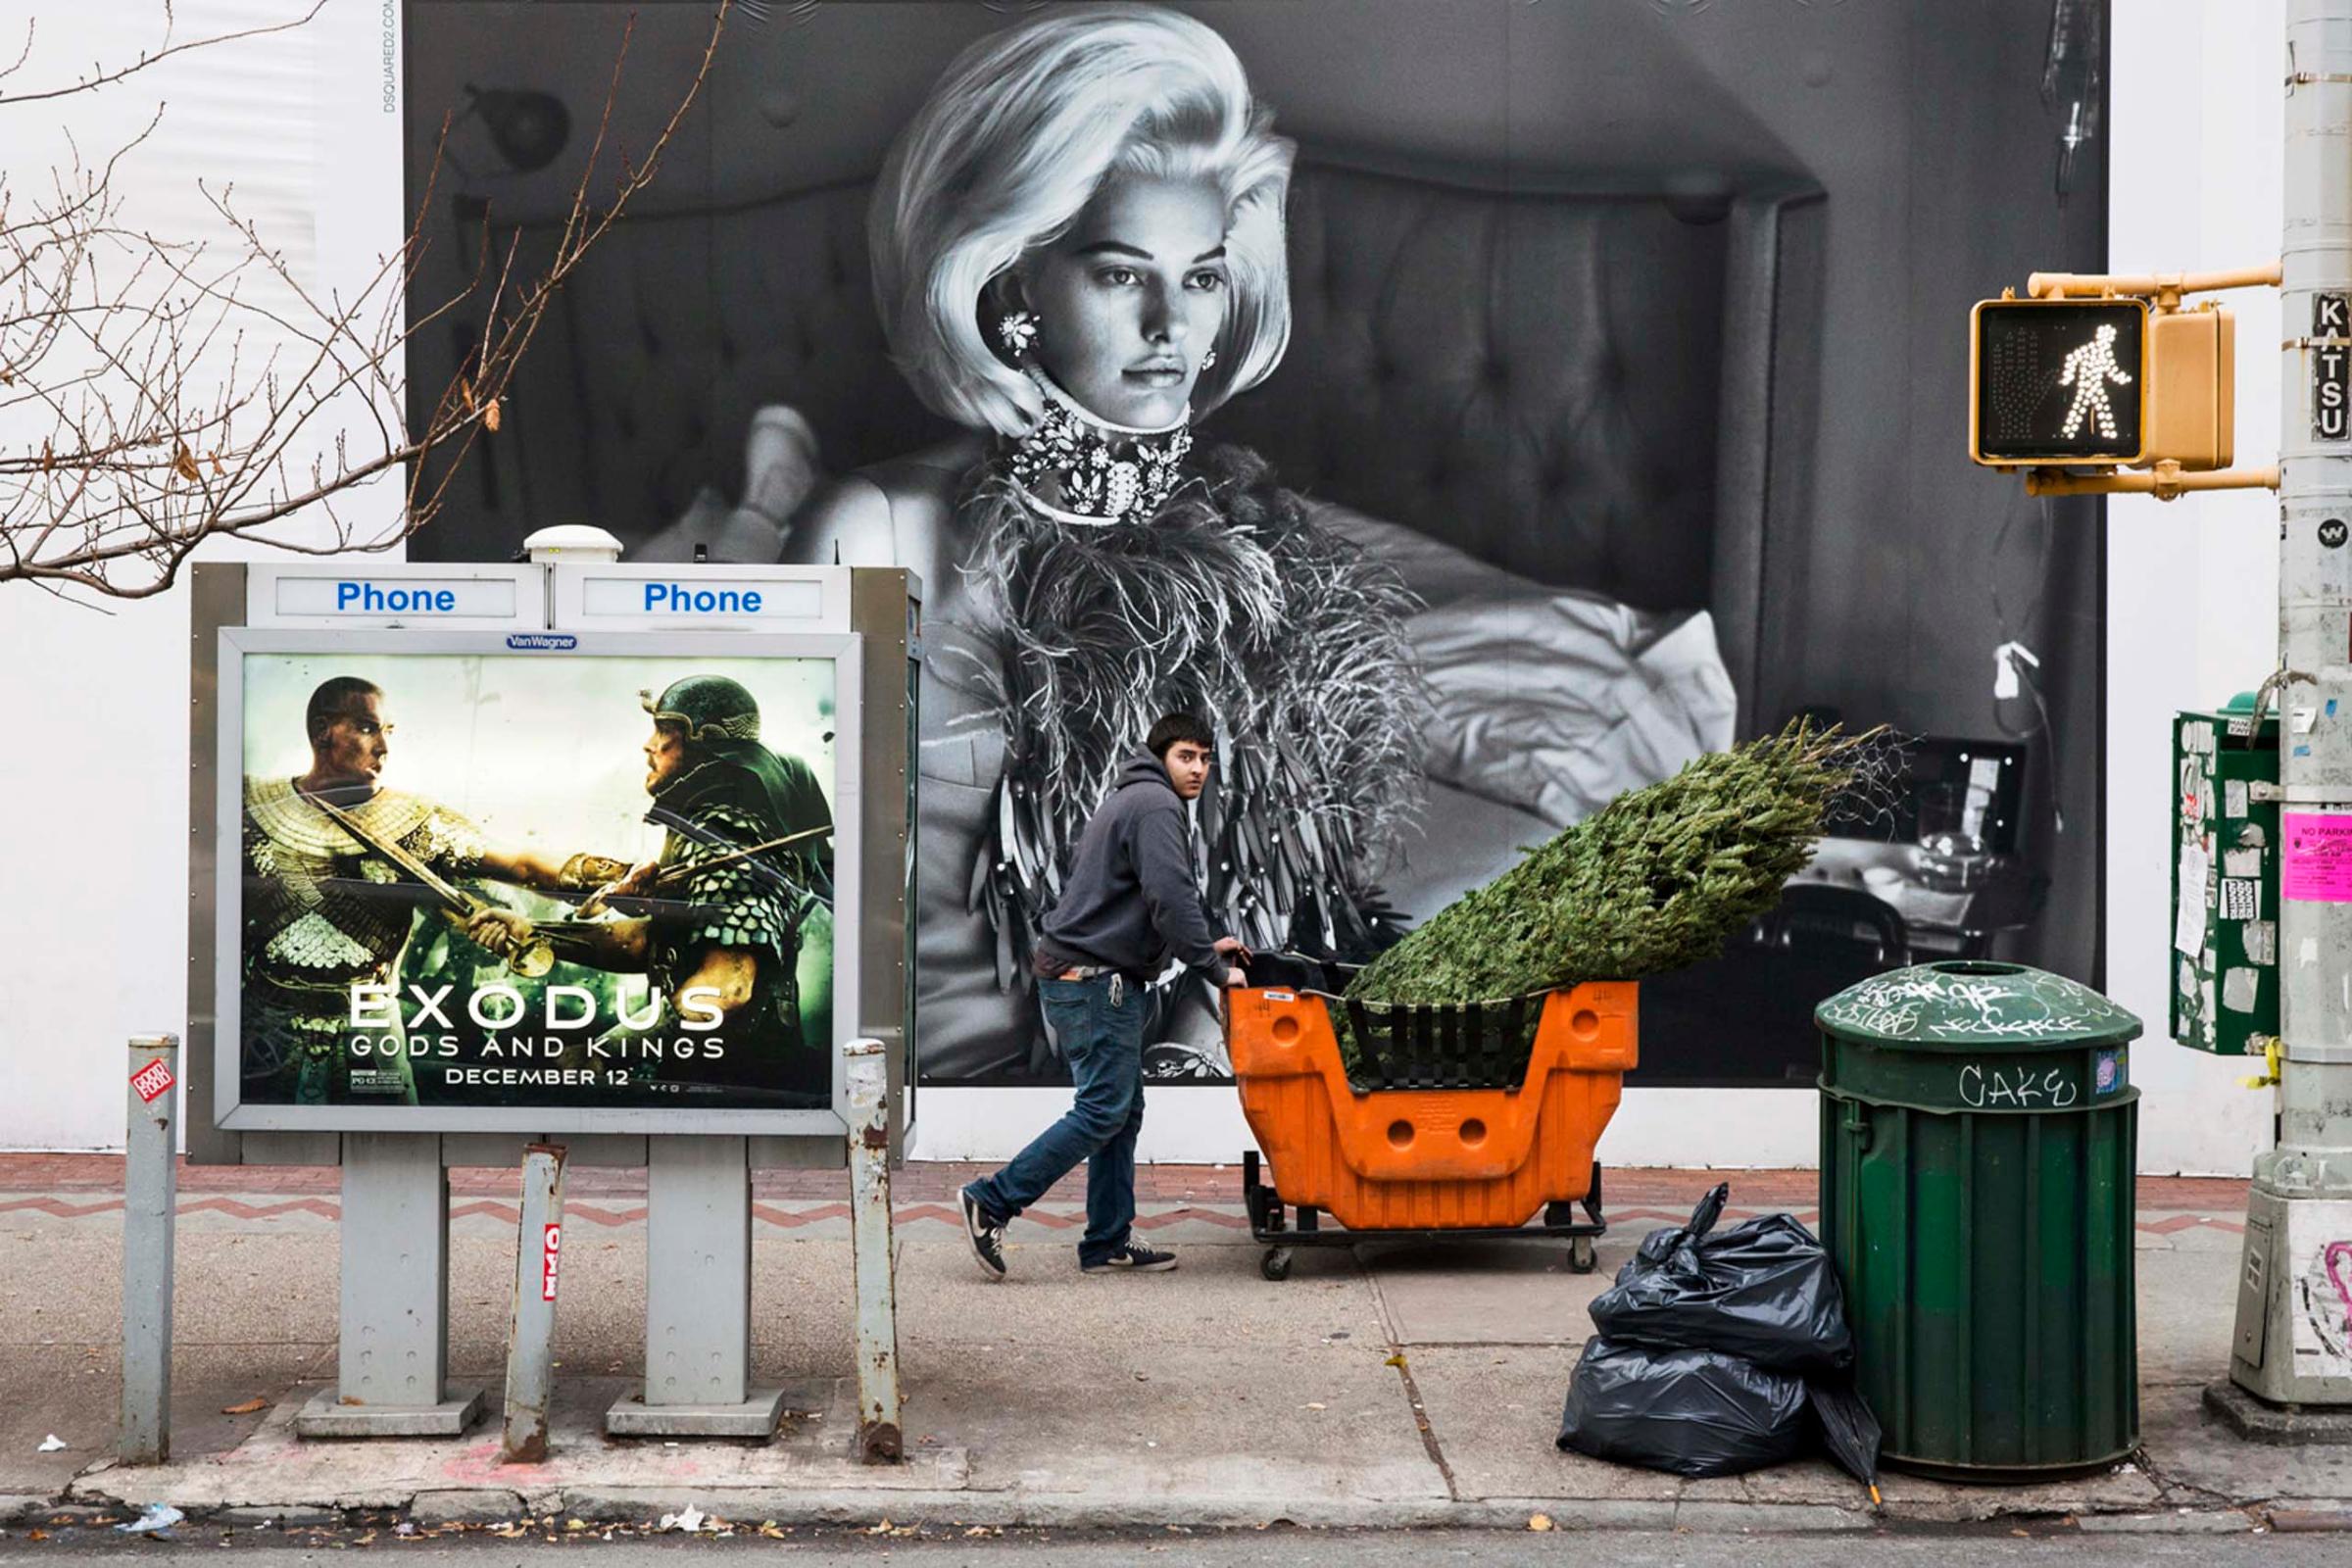 A man pushes a cart containing a wrapped Christmas Tree next to a DSquared2 billboard on West Broadway Avenue, New York, Dec. 12, 2014.